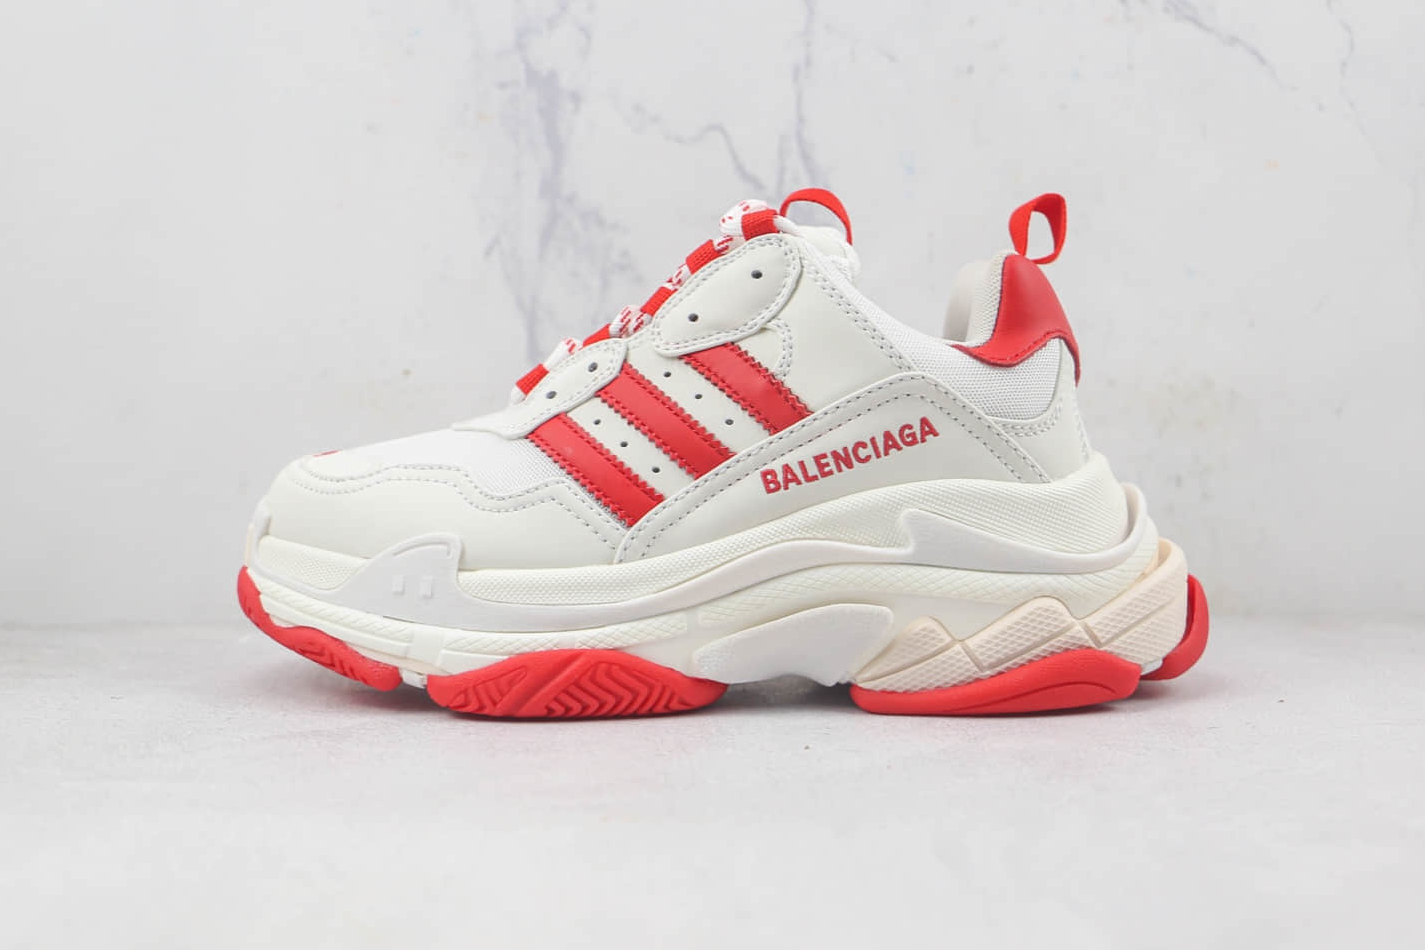 Balenciaga X Adidas Triple S White Red IF0166 - Stylish and Sleek Footwear by Renowned Brands